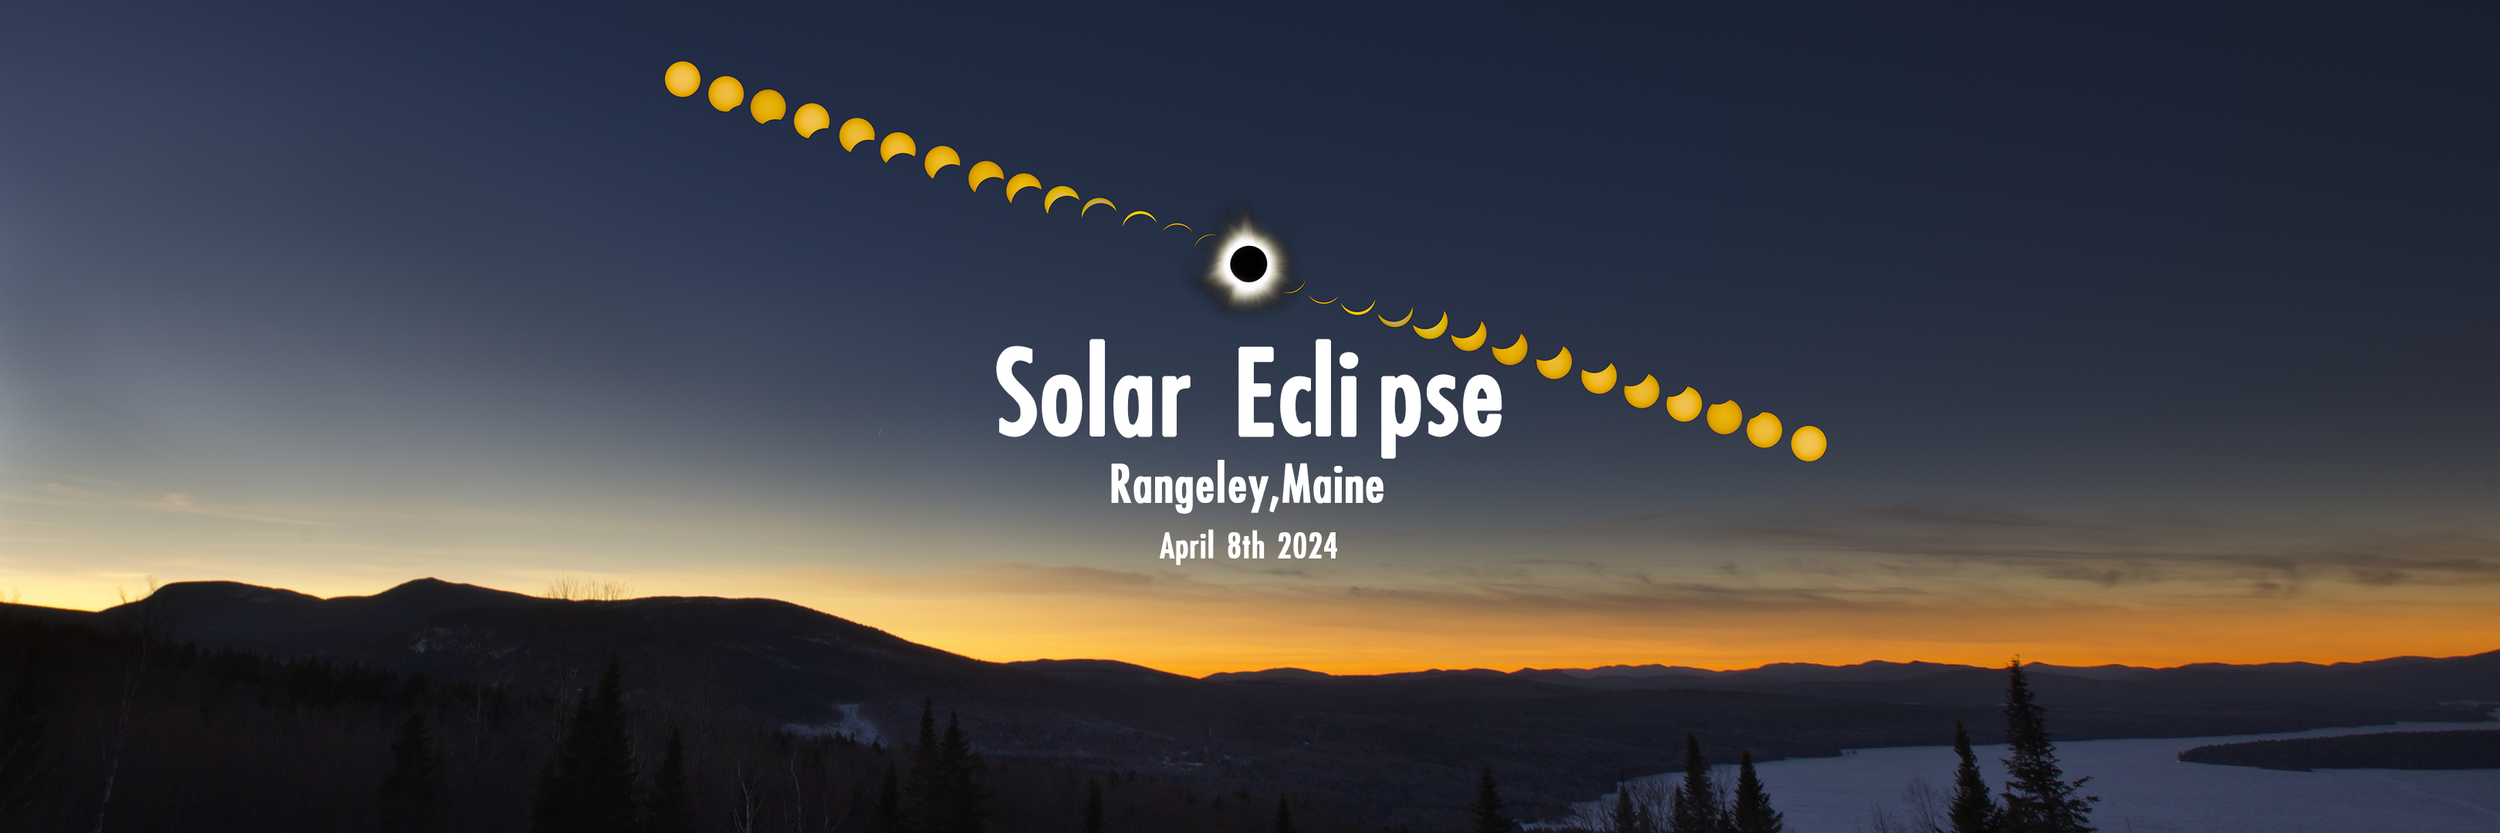 EclipseComposite_3240_1080_Website_Text_Date.png